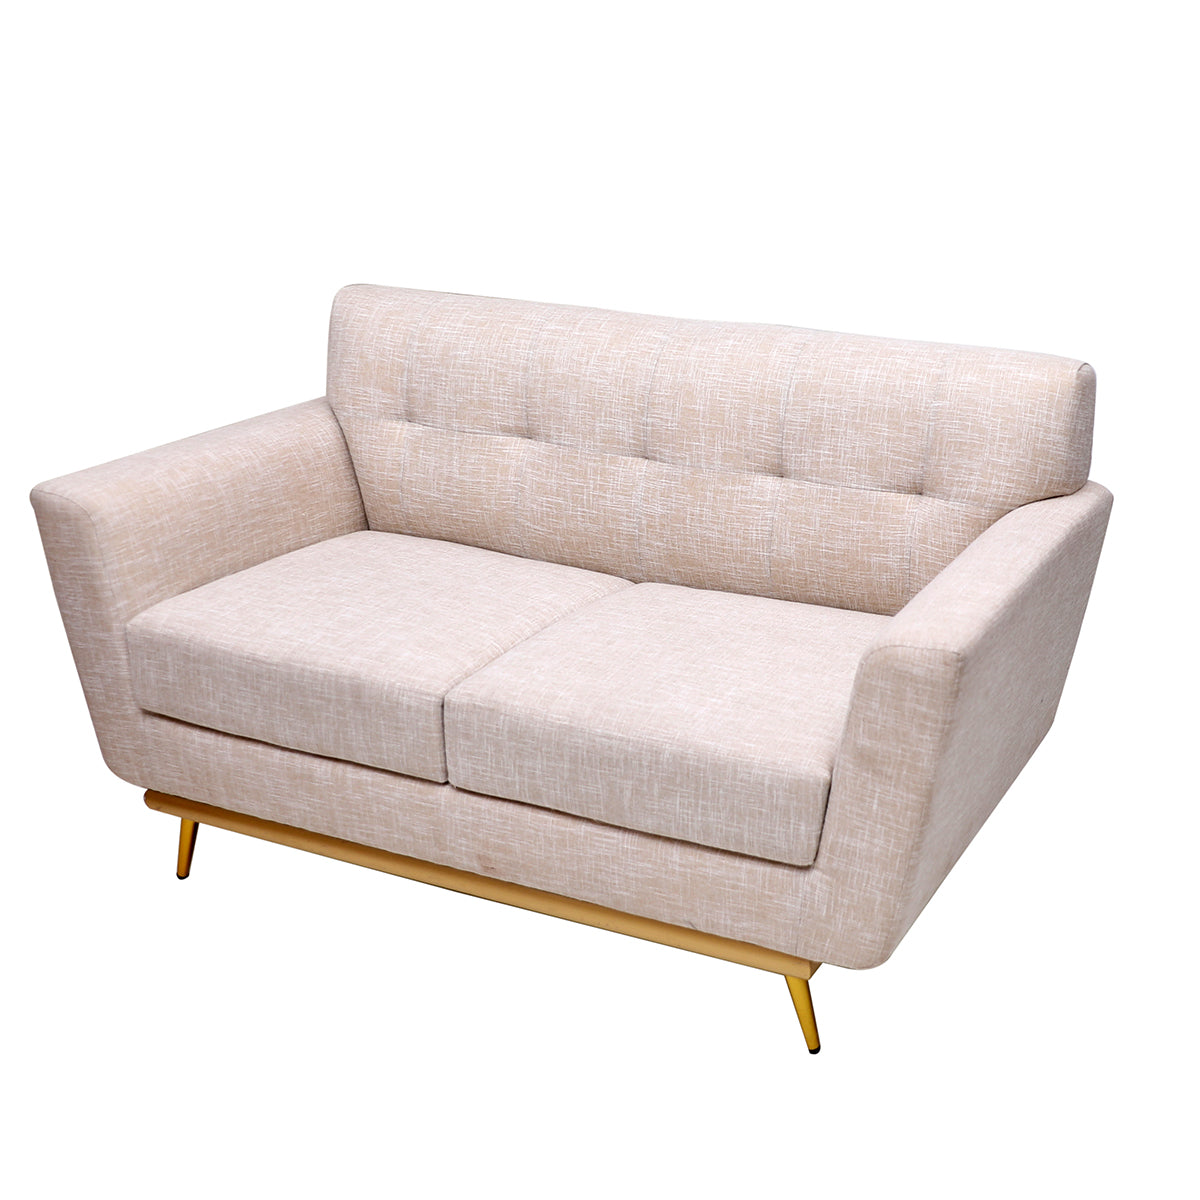 Rochester Sofa Set & Honey Comb Coffee Table + Gift Card Worth 15,000/-